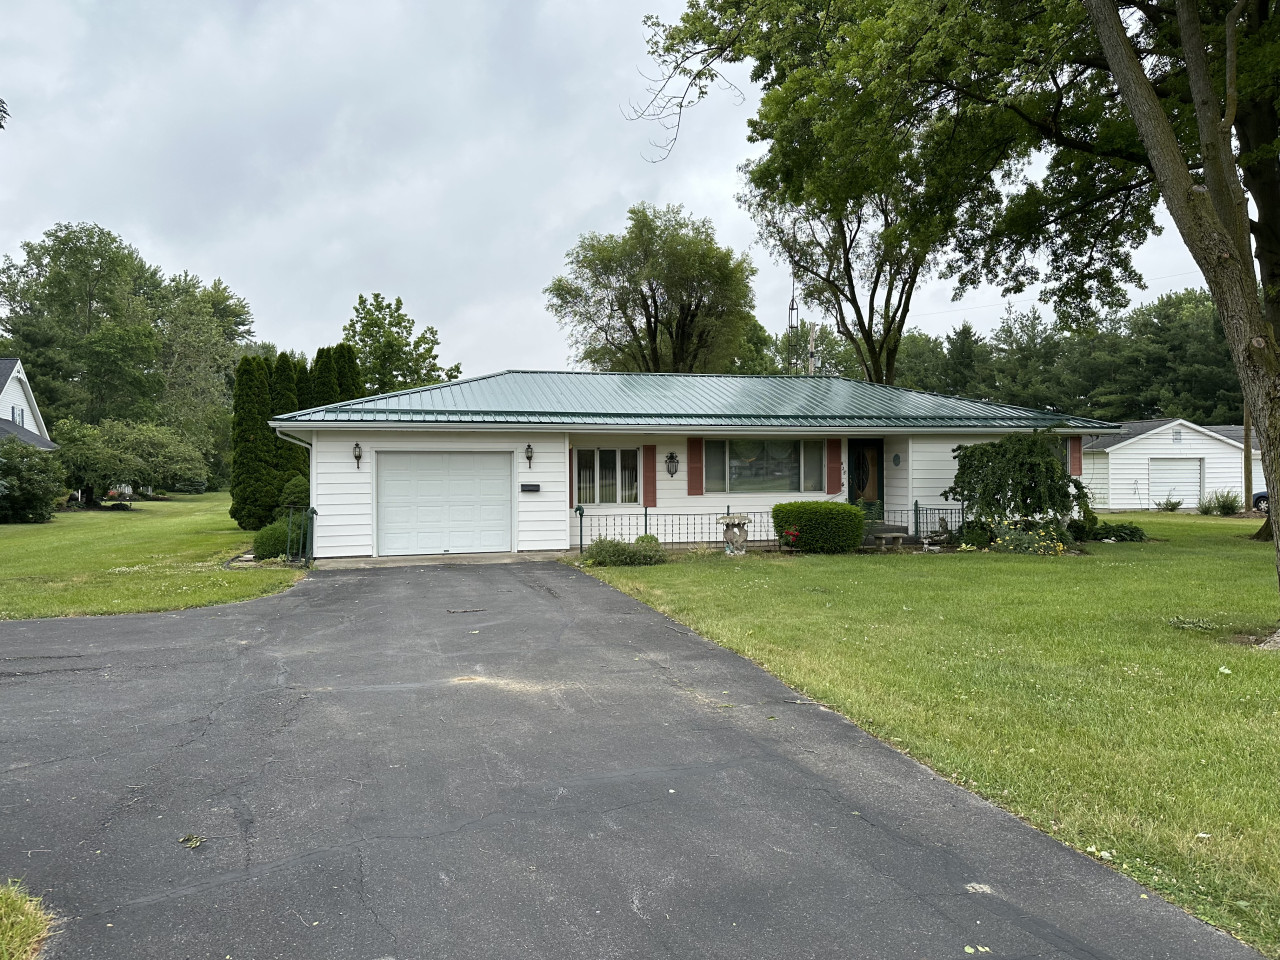 Fort Wayne Auctions & Real Estate Krueckeberg Auction & Realty